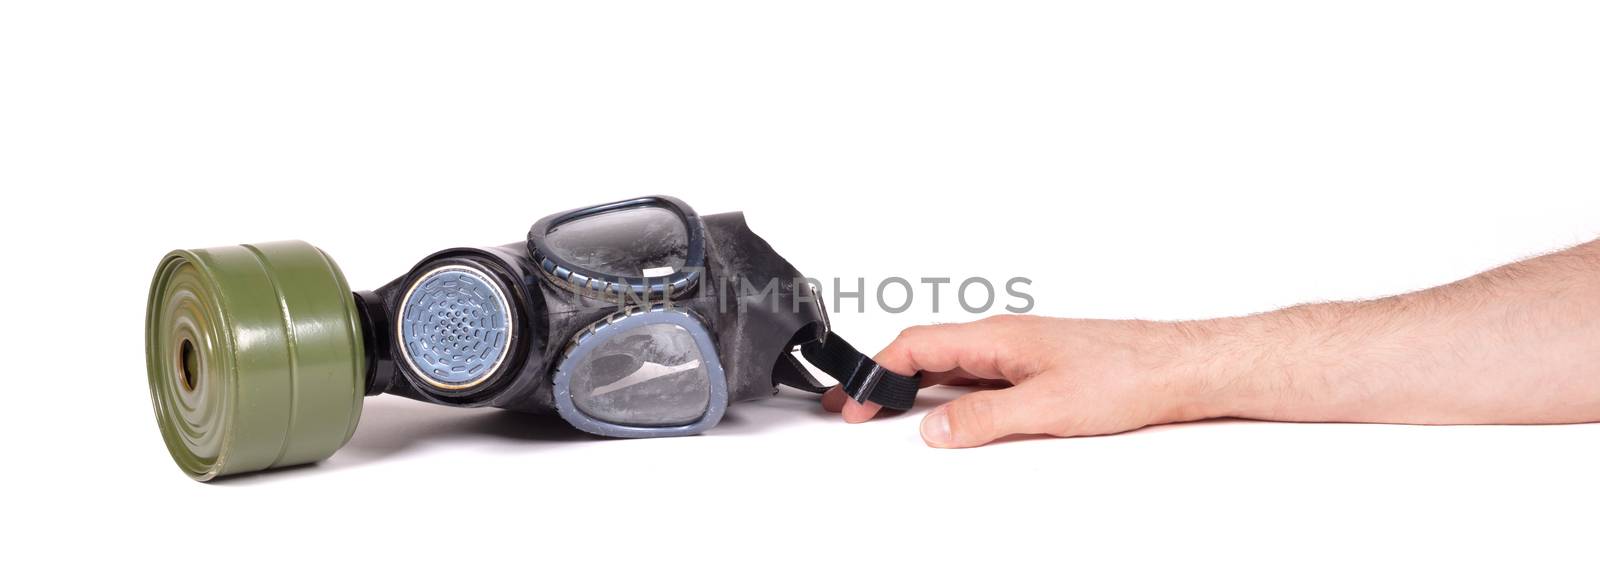 Arm reaching for vintage gasmask isolated on a white background - Green filter